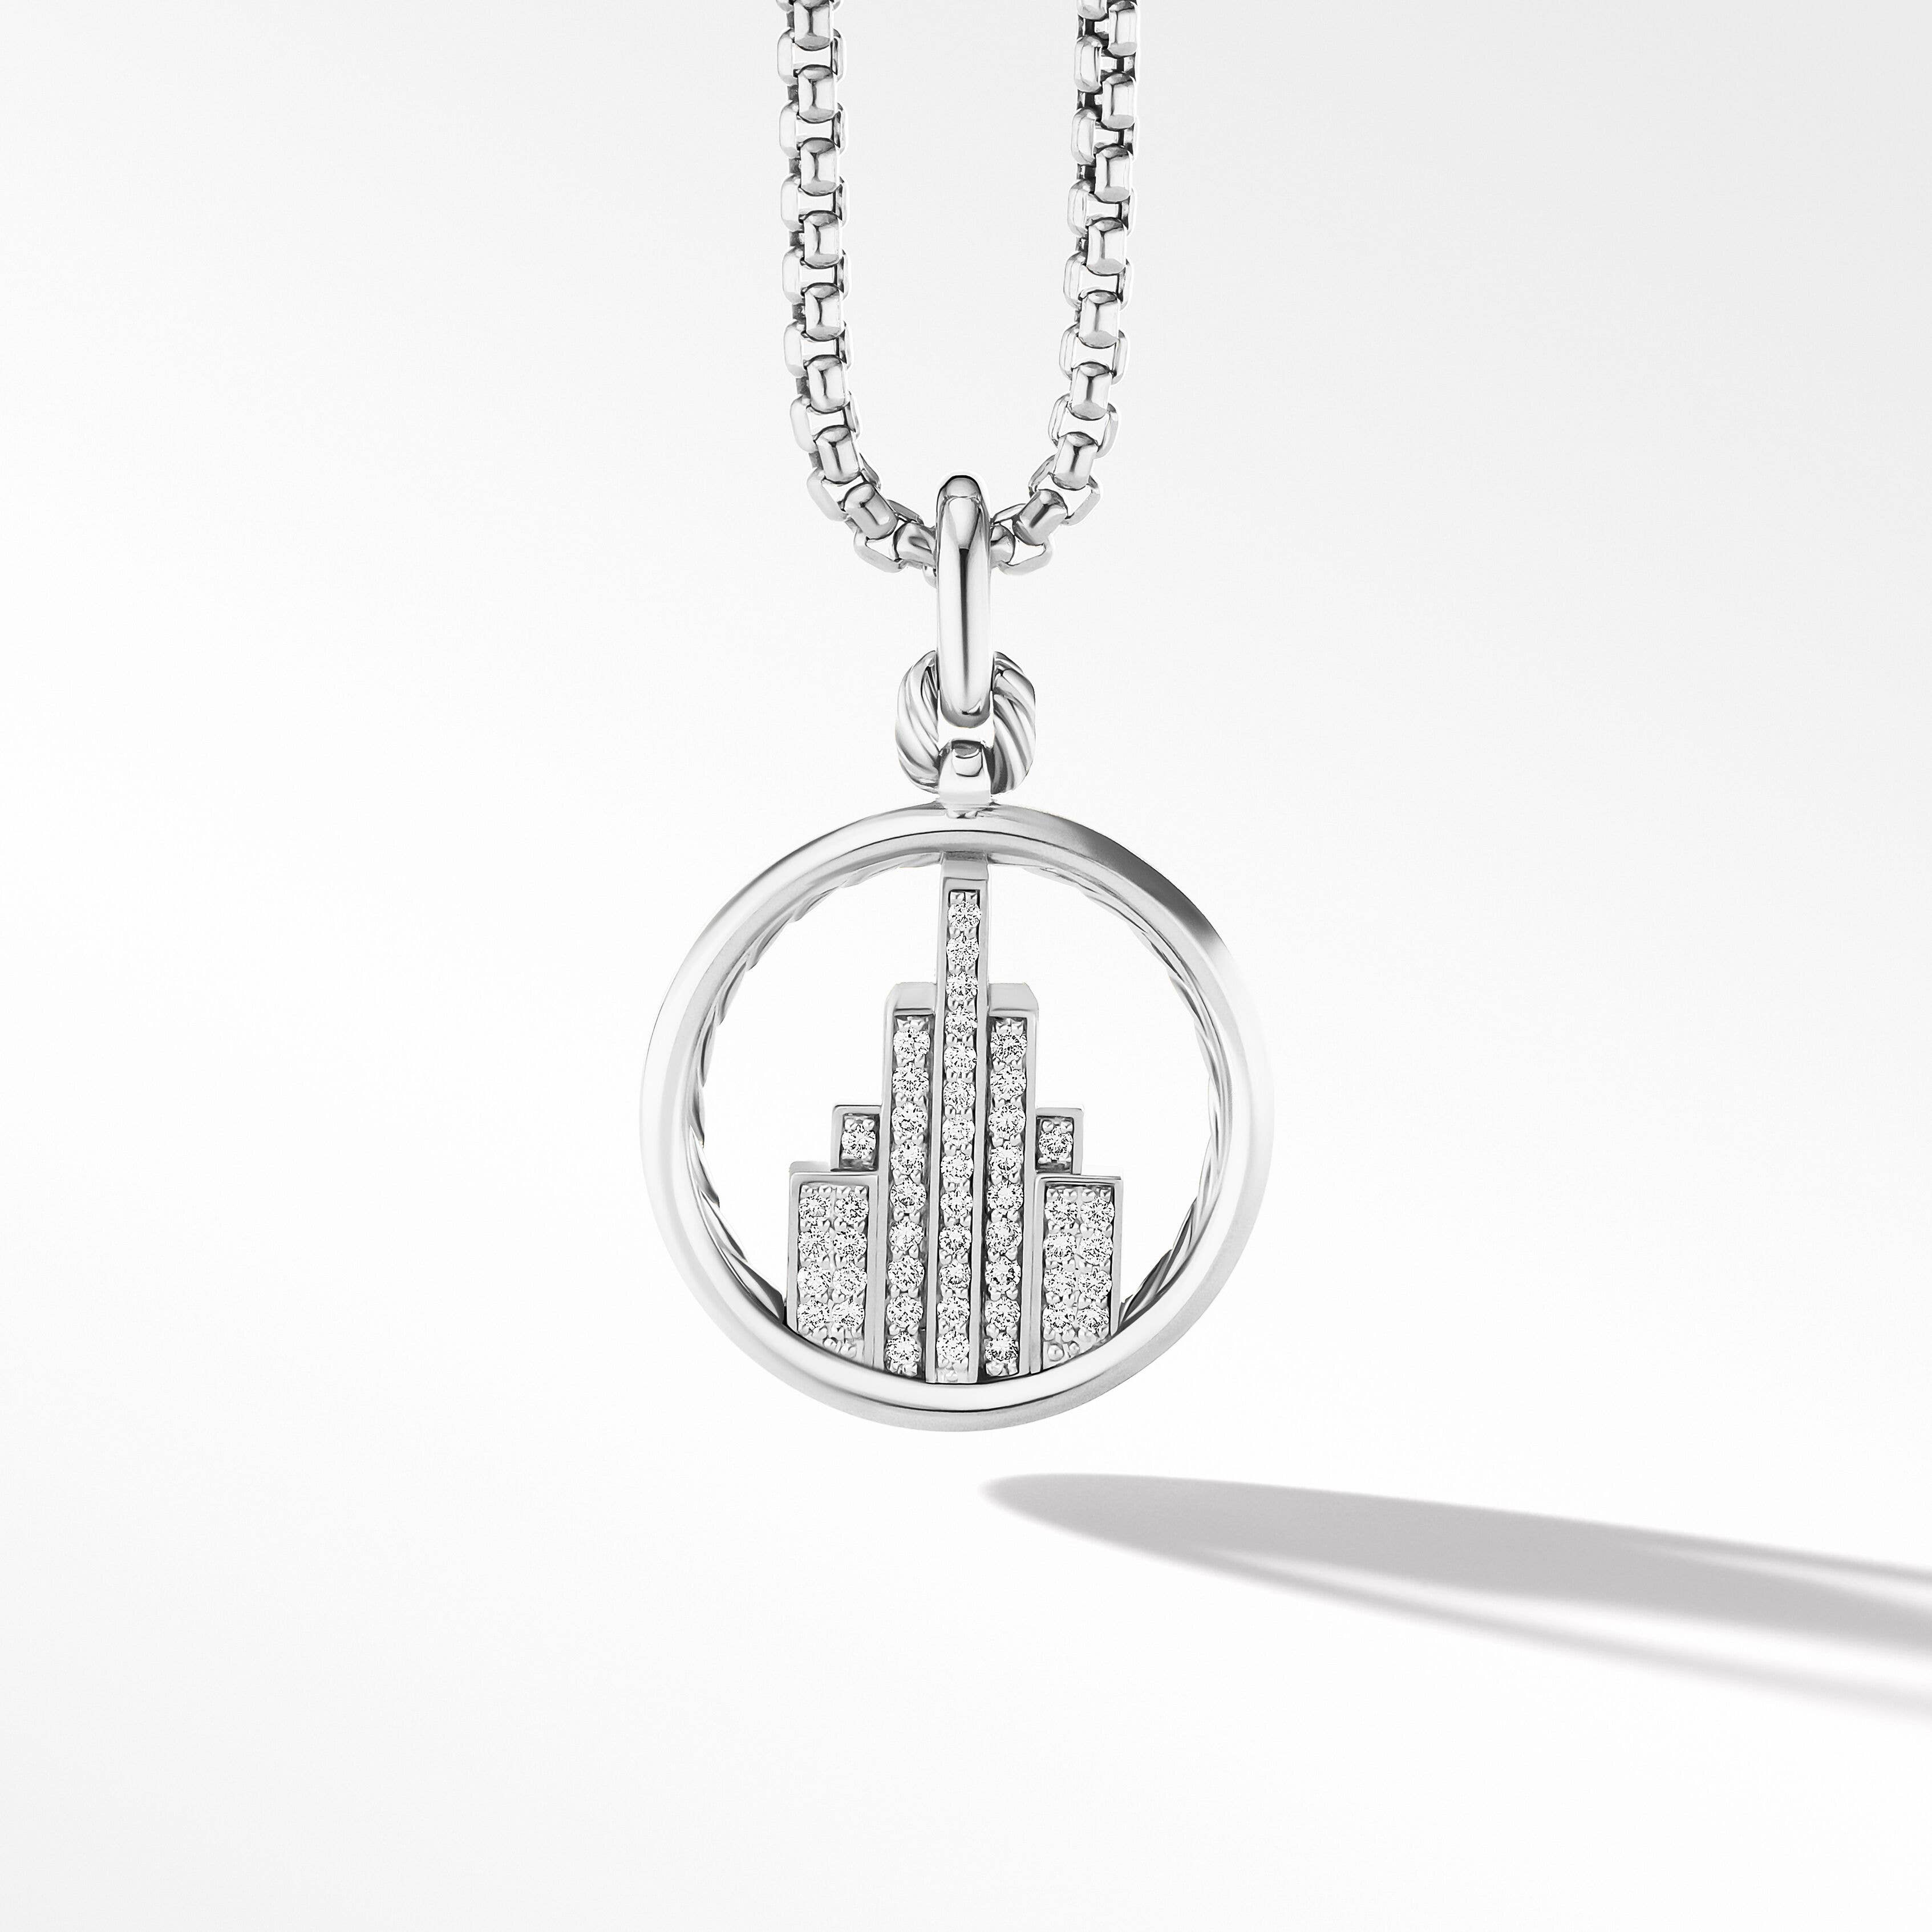 Empire Amulet in Sterling Silver with Pavé Diamonds